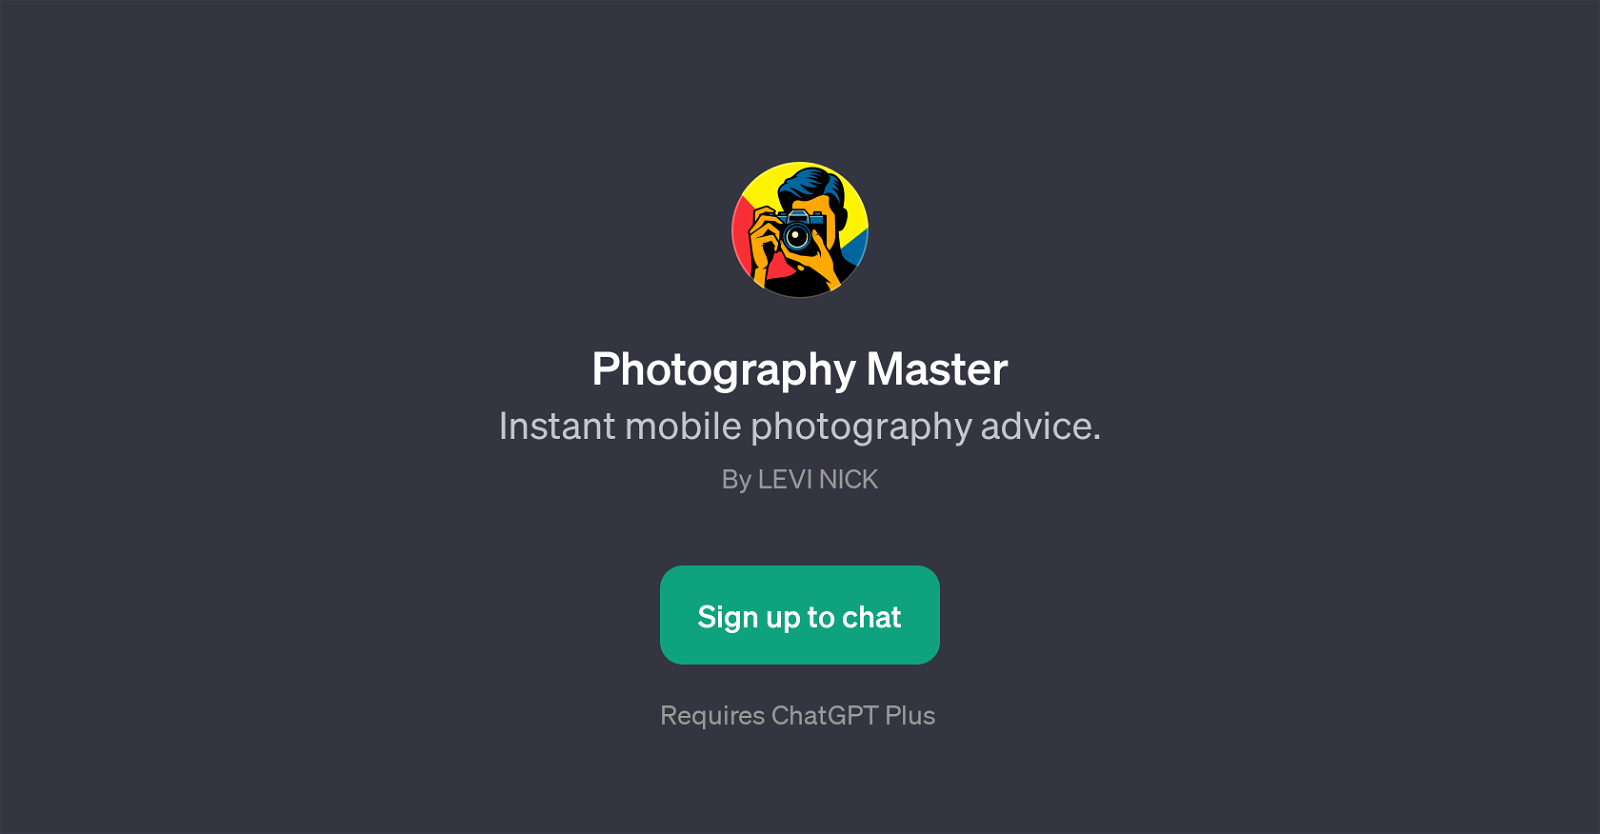 Photography Master website